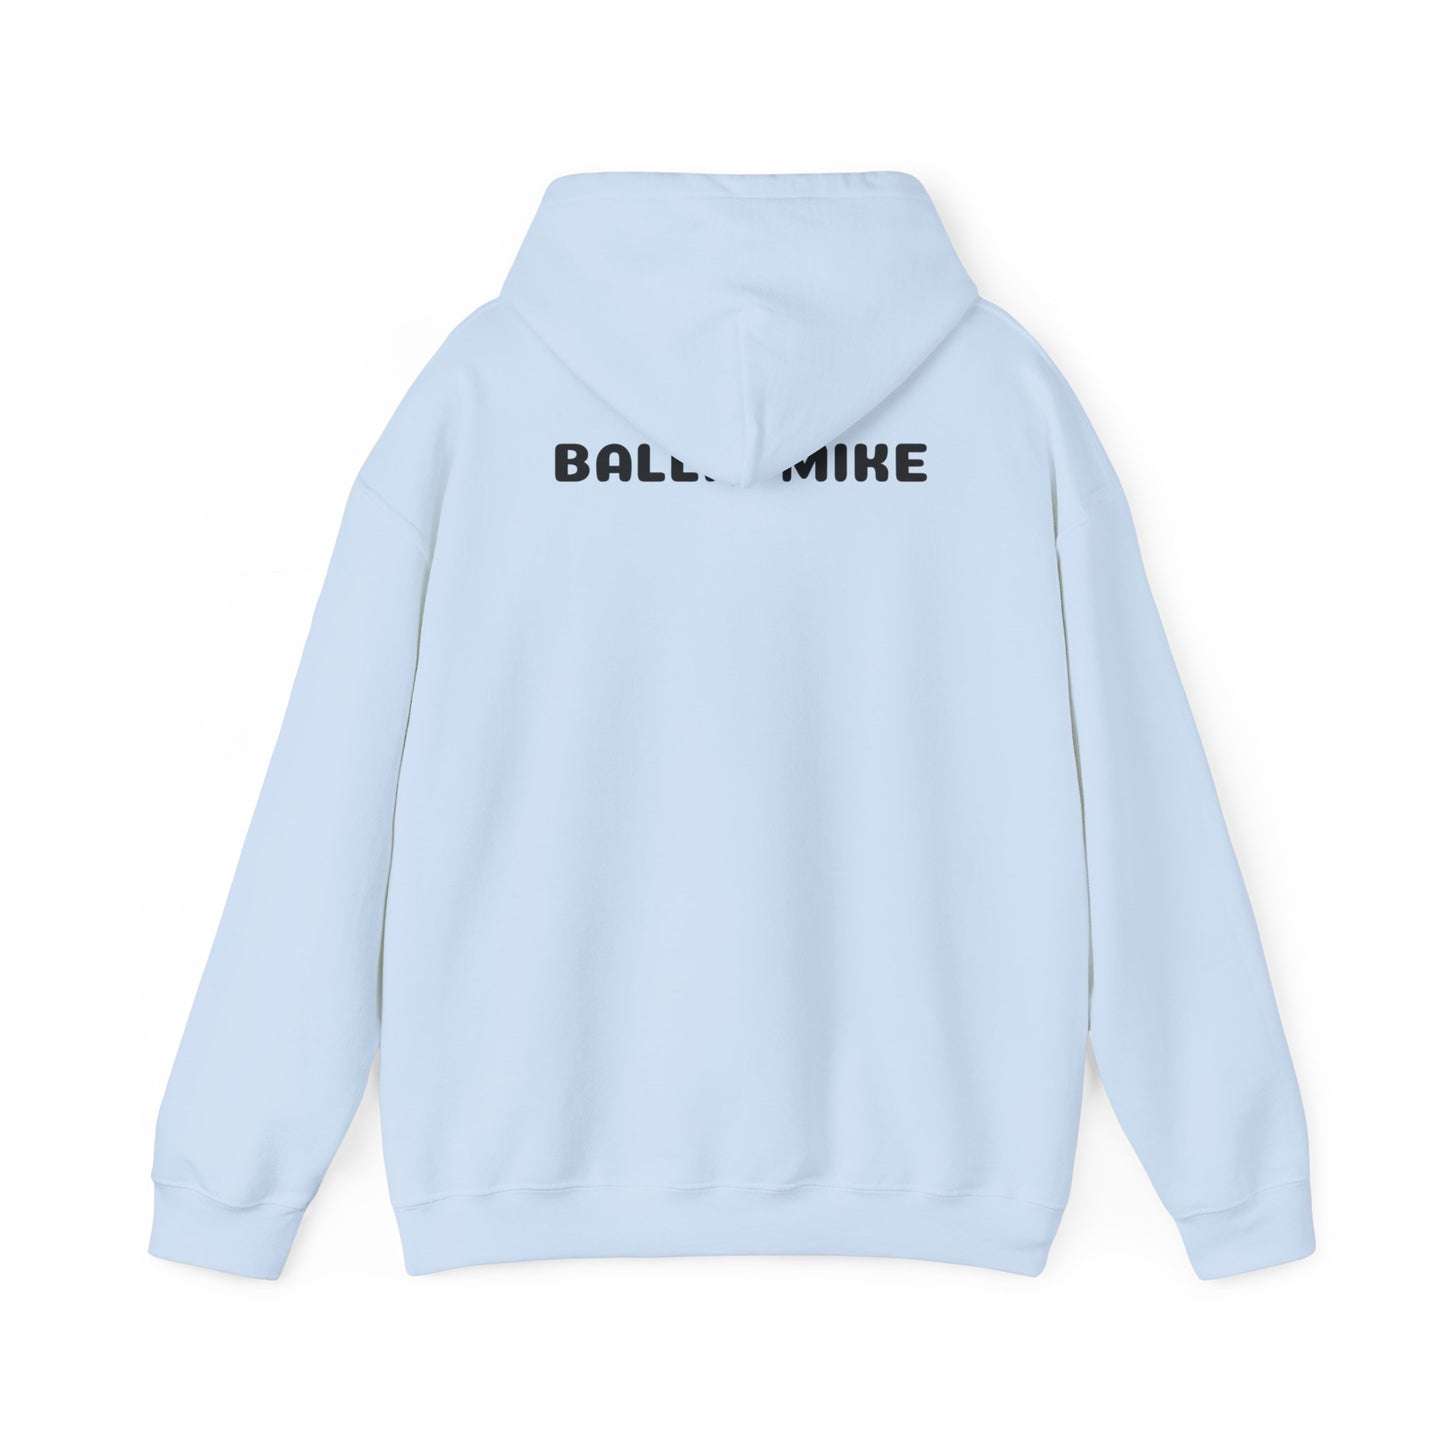 Ballin Mike - "Make Today Epic" - Unisex Hoodie